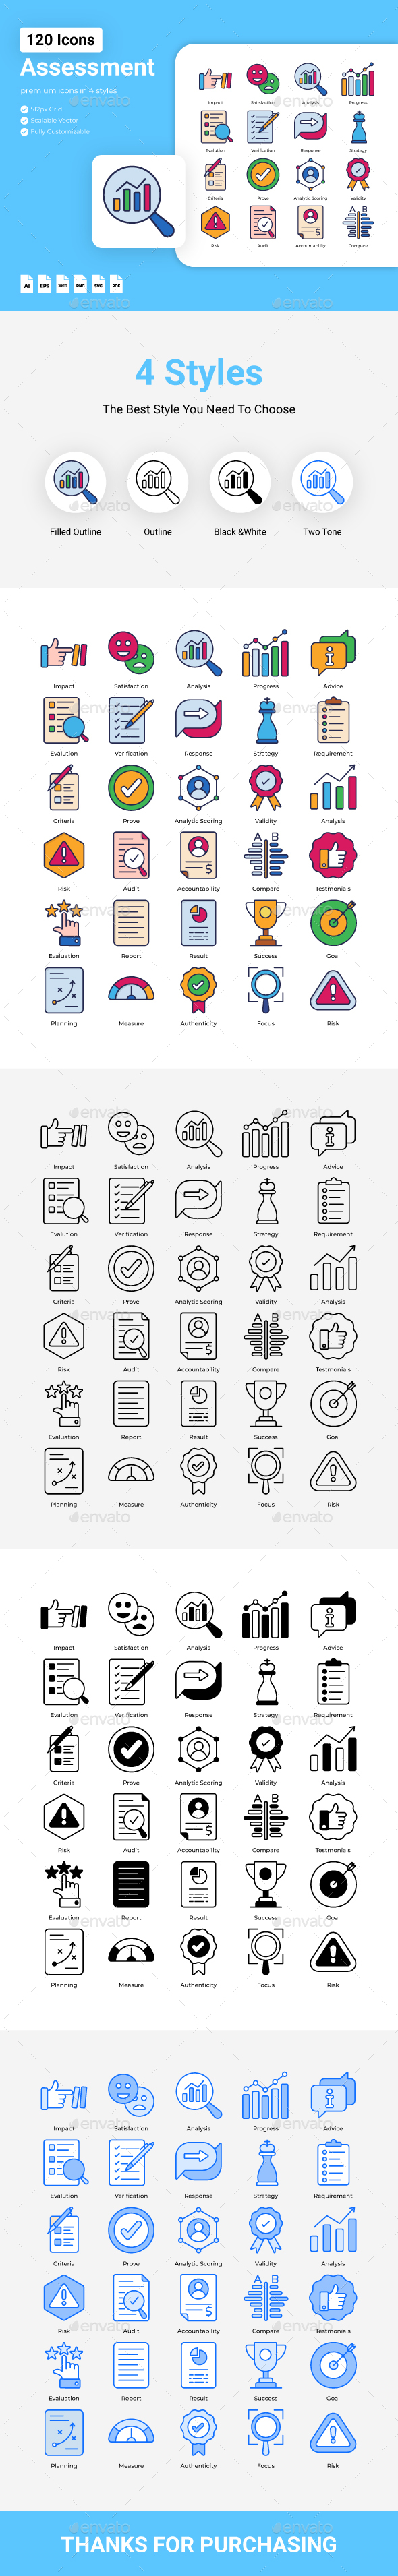 [DOWNLOAD]Assessment Icons